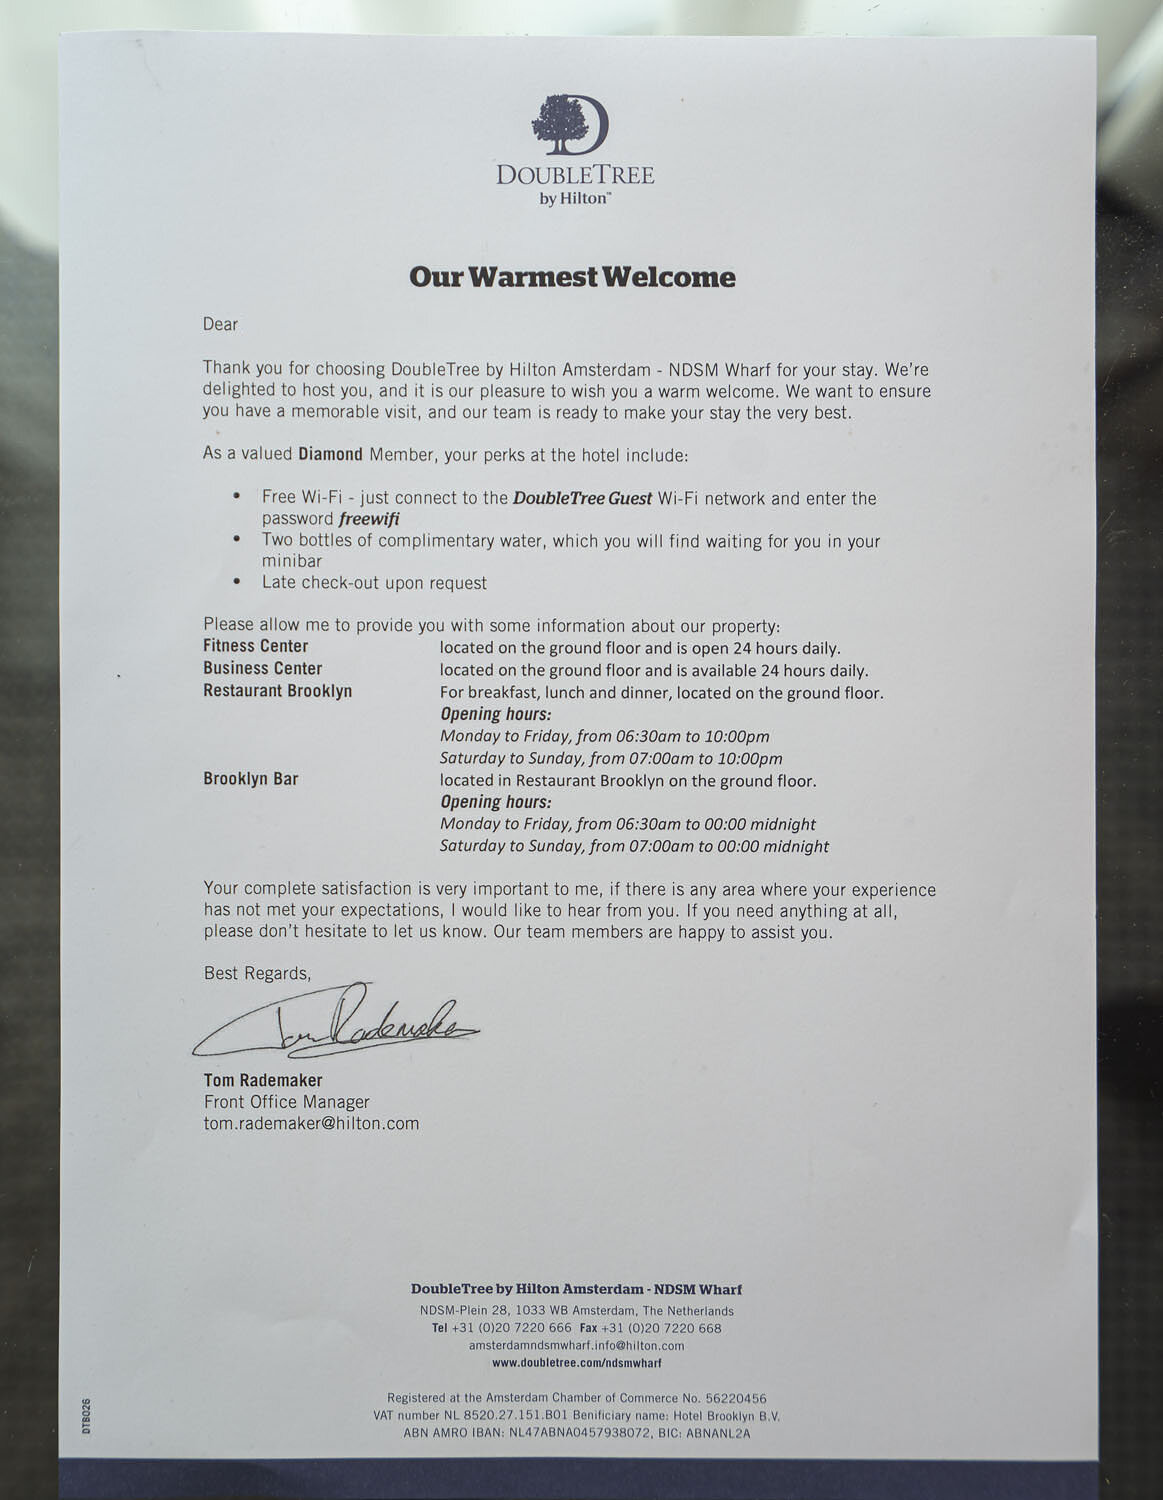 Diamond member welcome letter (Click to enlarge)